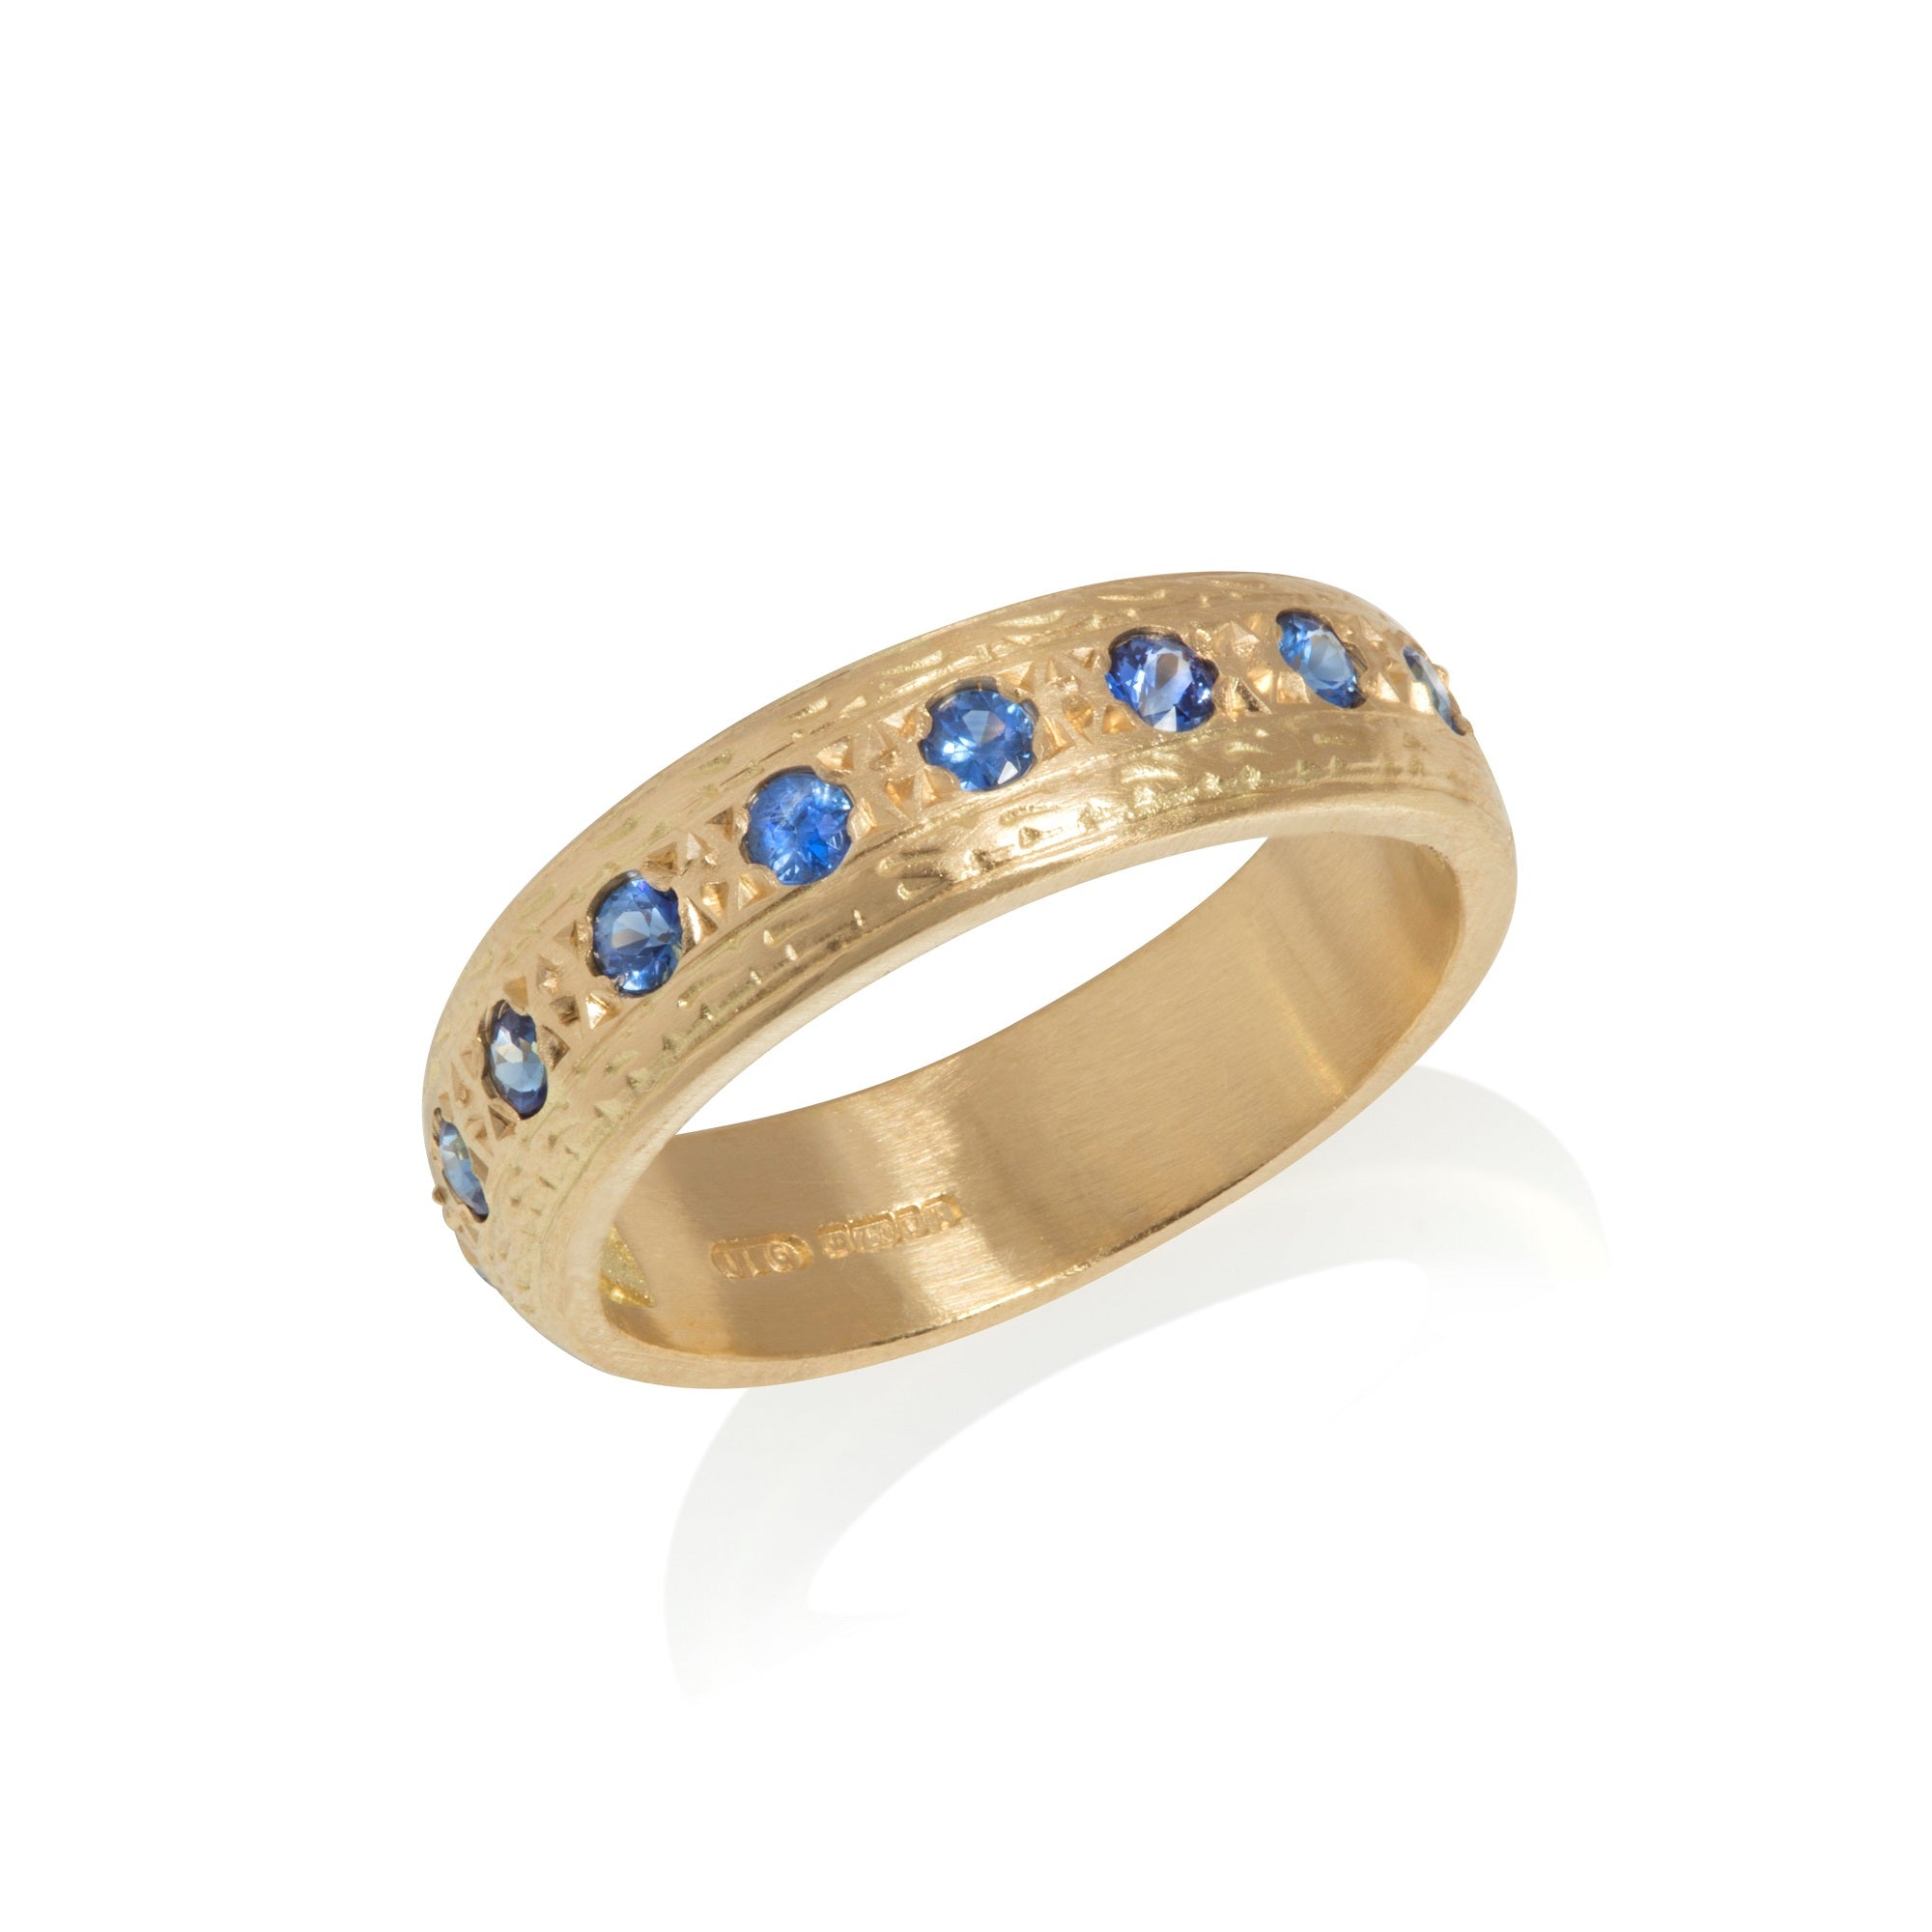 Yellow gold half eternity ring, set with blue sapphires